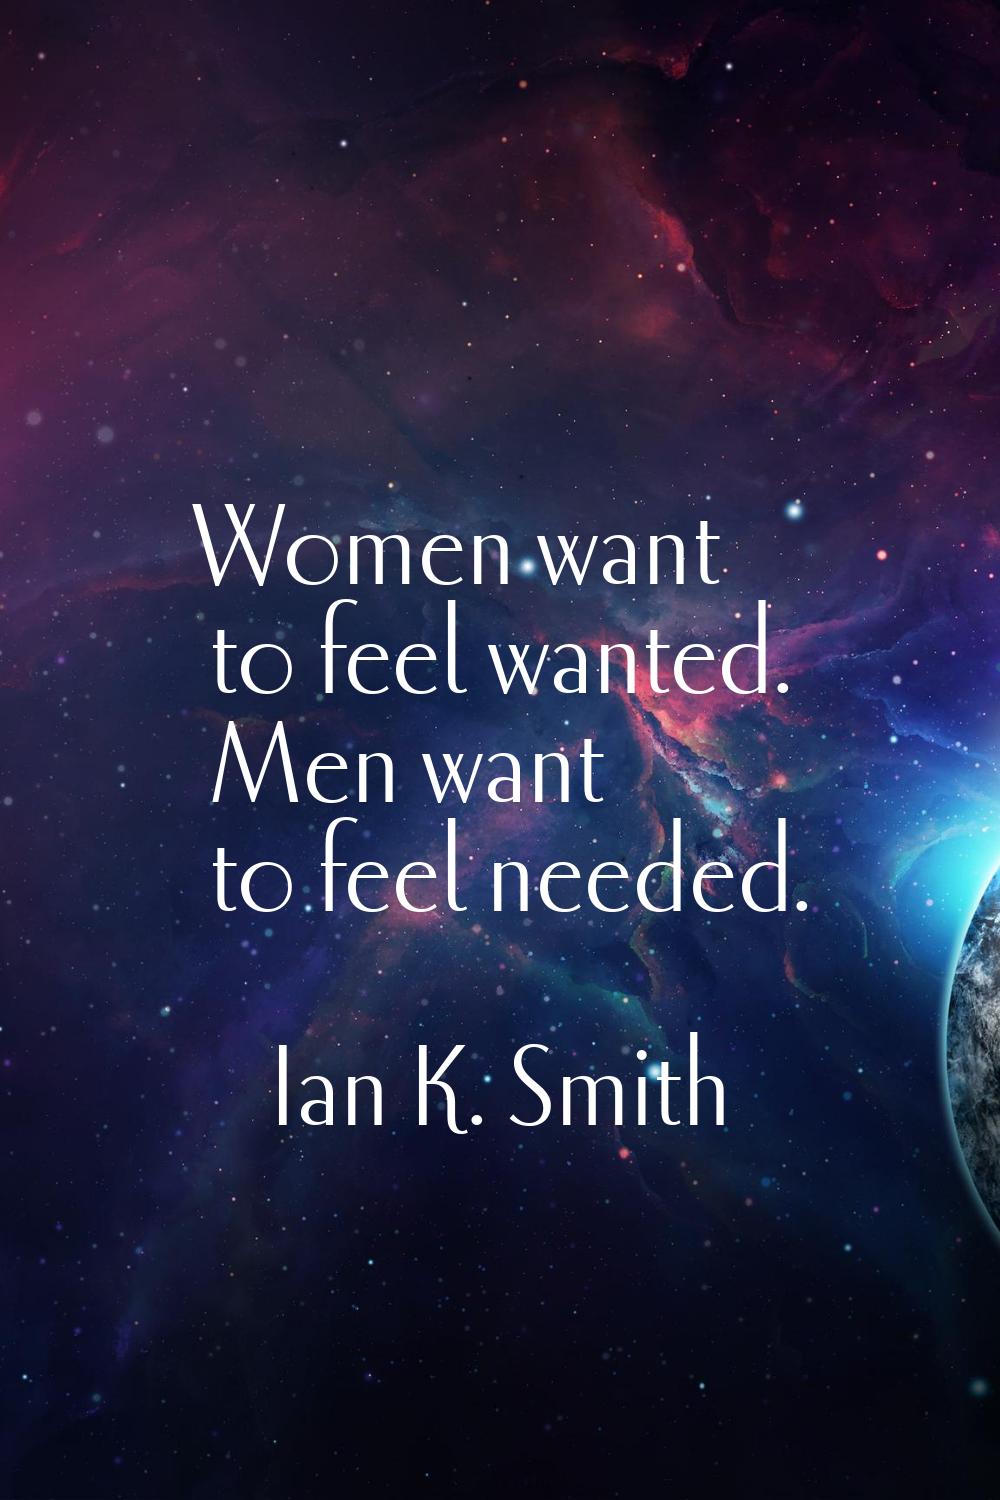 Women want to feel wanted. Men want to feel needed.